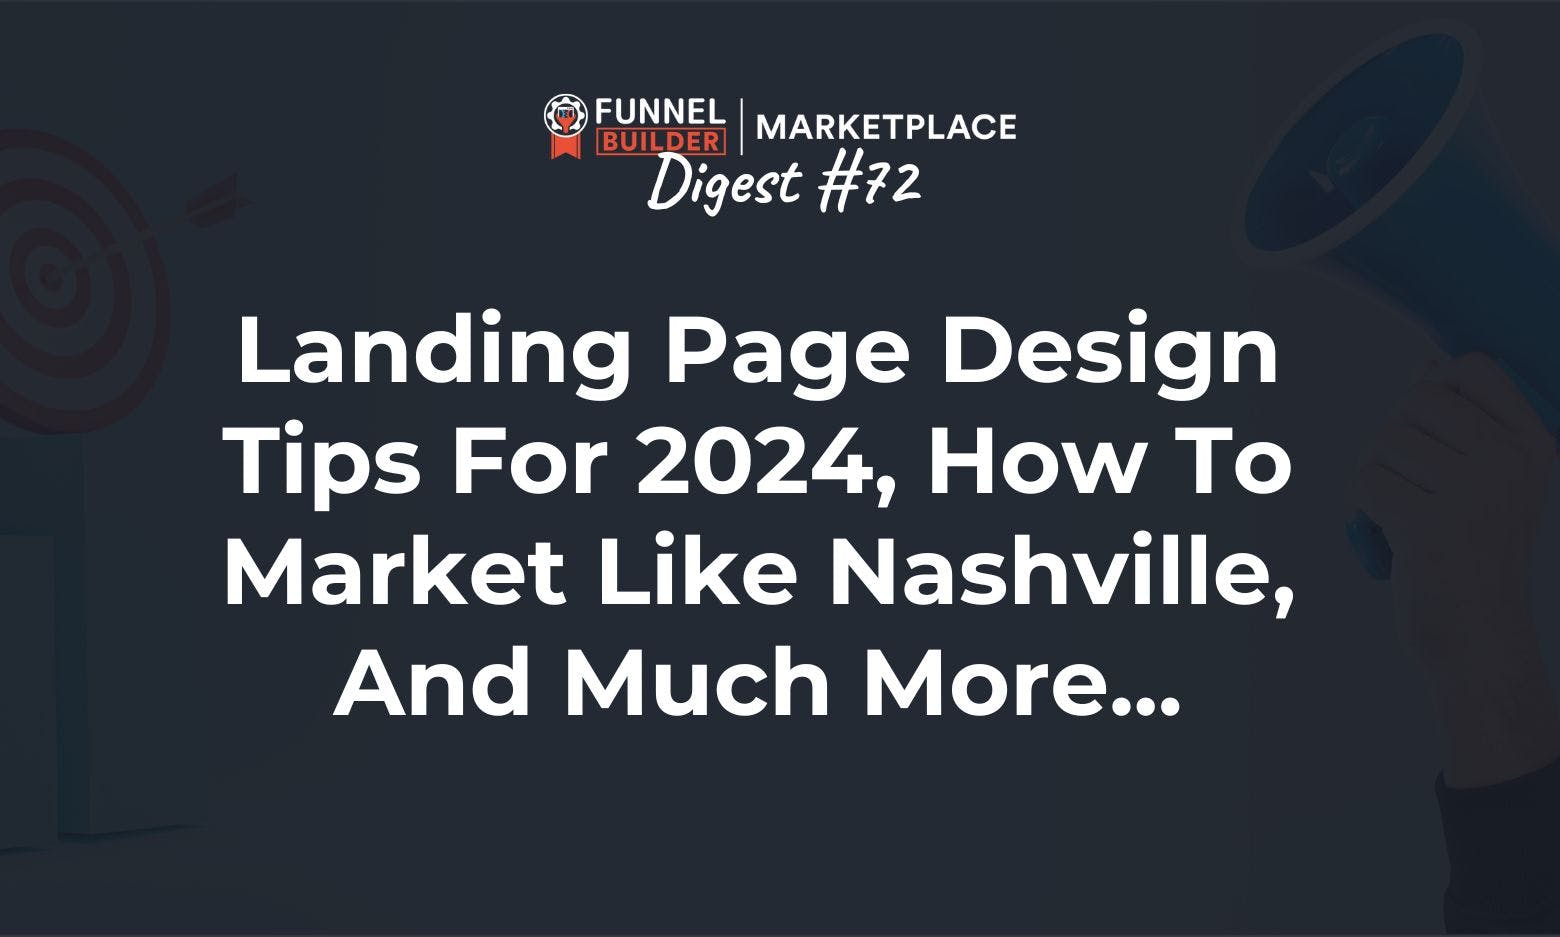 FBM Digest #72: Landing page design tips for 2024, how to market like Nashville, and much more...